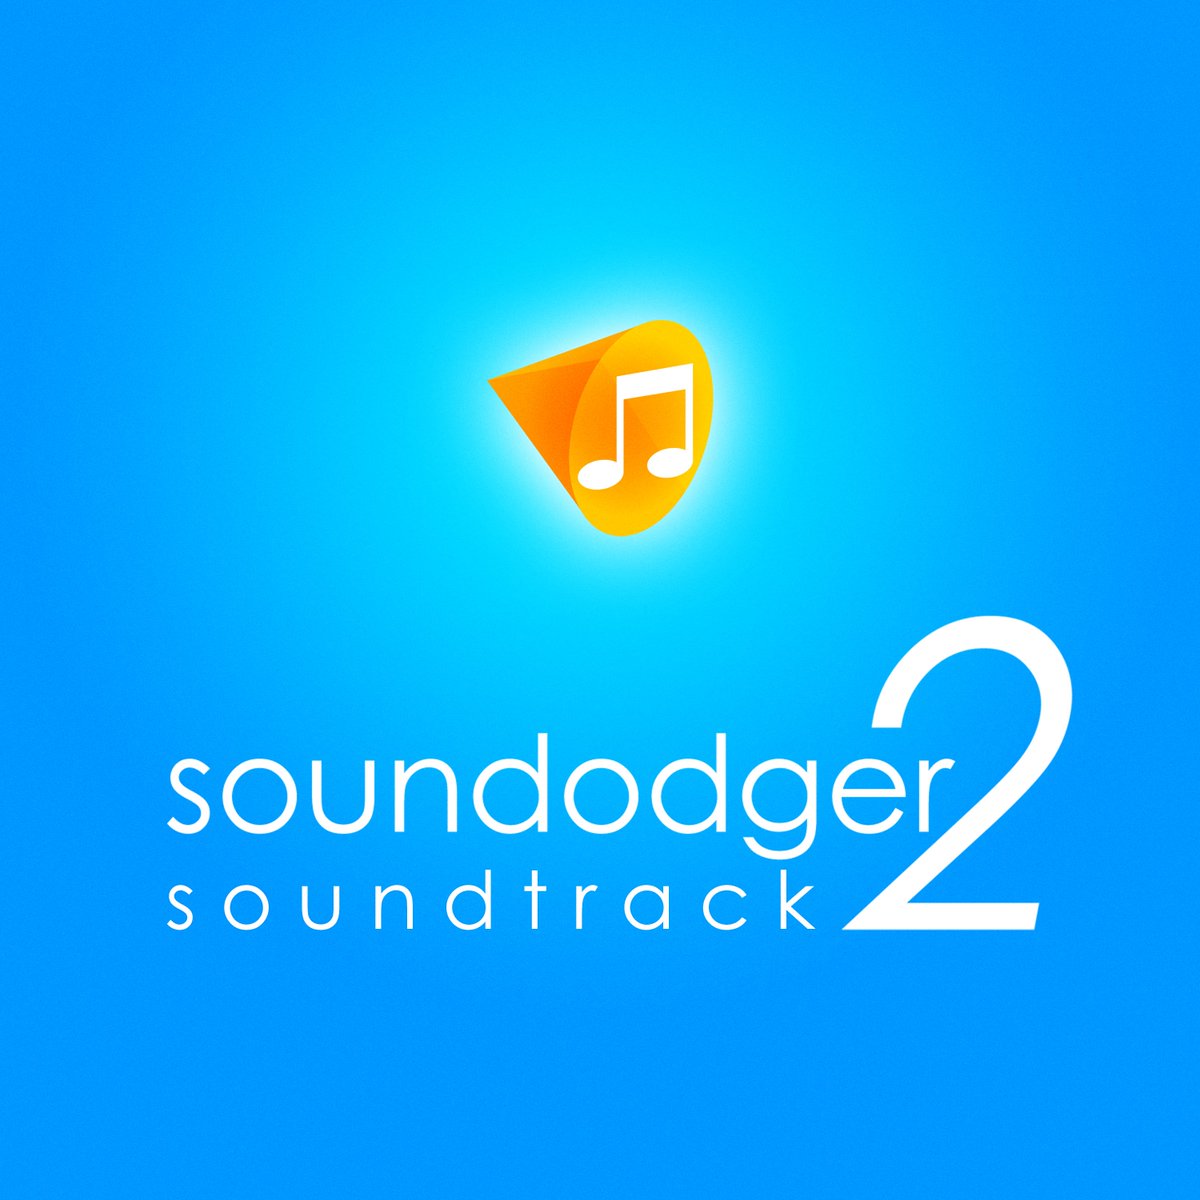 Lo, in releasing Soundodger 2, the official soundtrack dropped simultaneously! All 40 tracks are here, plus some extras found elsewhere in the game. All 40 alternate album covers are included too. Steam: store.steampowered.com/app/2340480/So… Bandcamp: onemrbean.bandcamp.com/album/soundodg…